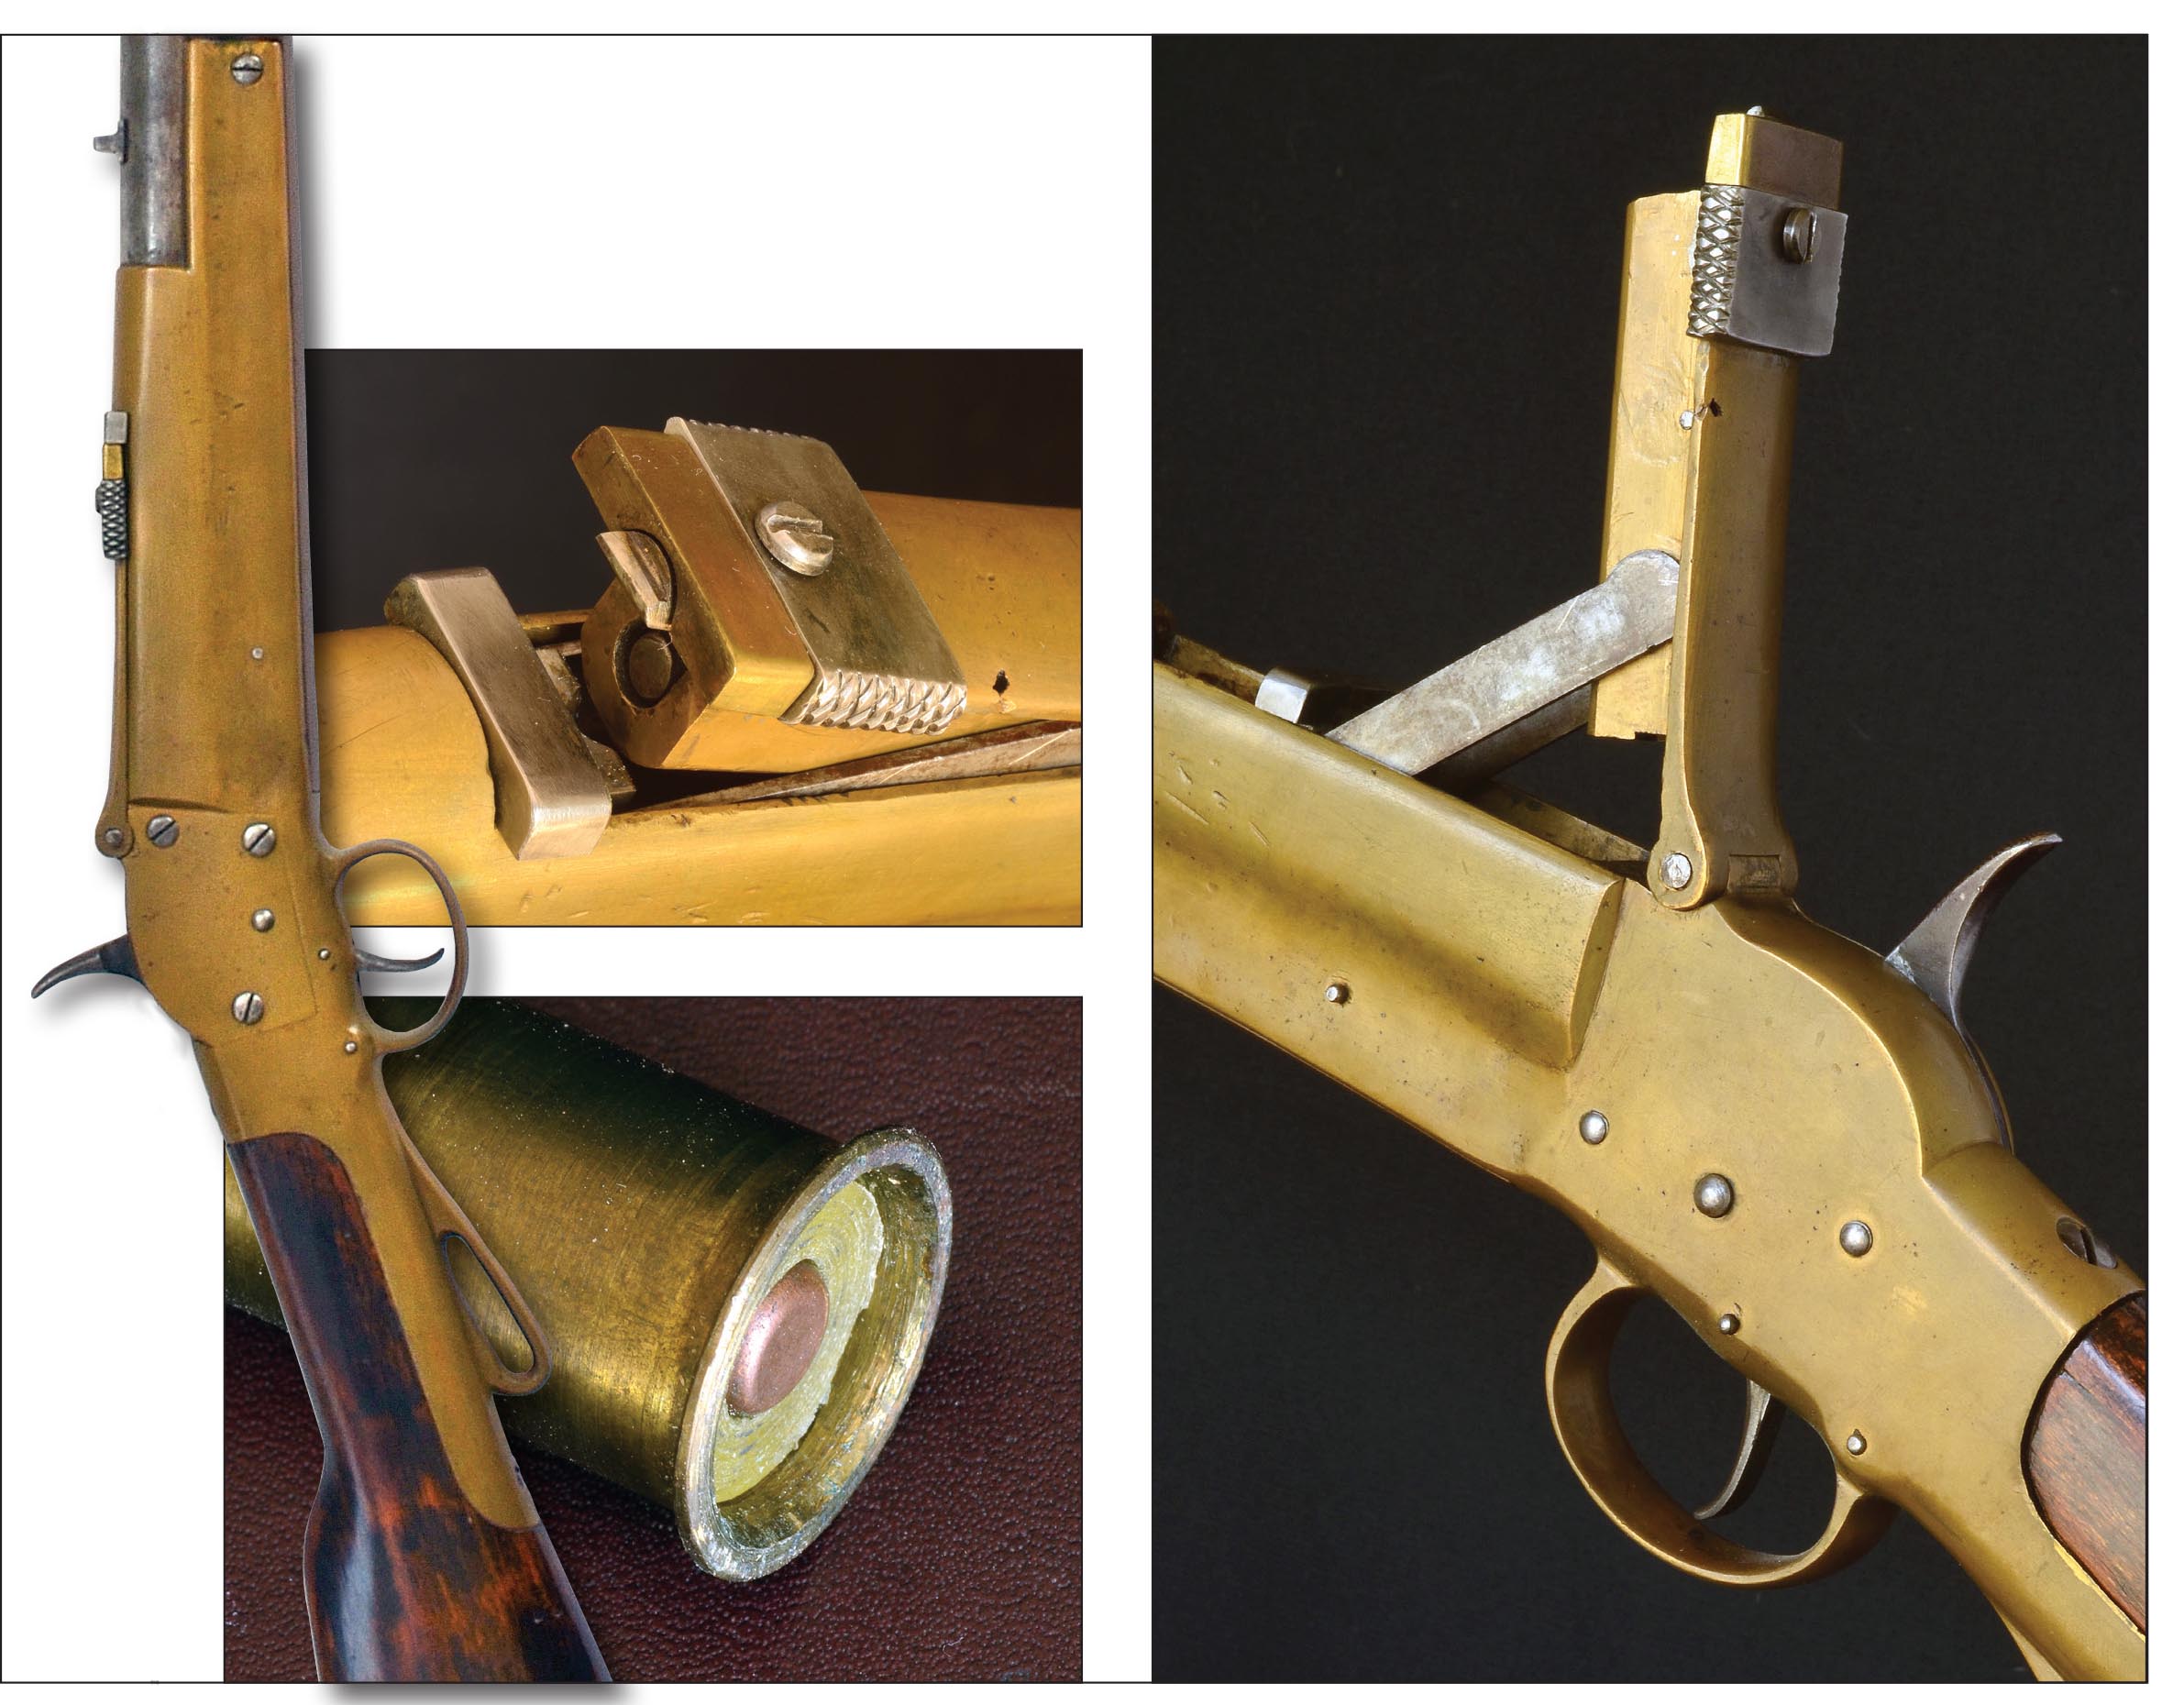 The Morse rifle was made by the Confederate States during the Civil War. It is very rare, especially in such fine condition, and extremely valuable. This one would be worth $25,000 to $40,000. It is a fascinating combination of a unique action and a .50-caliber cartridge.